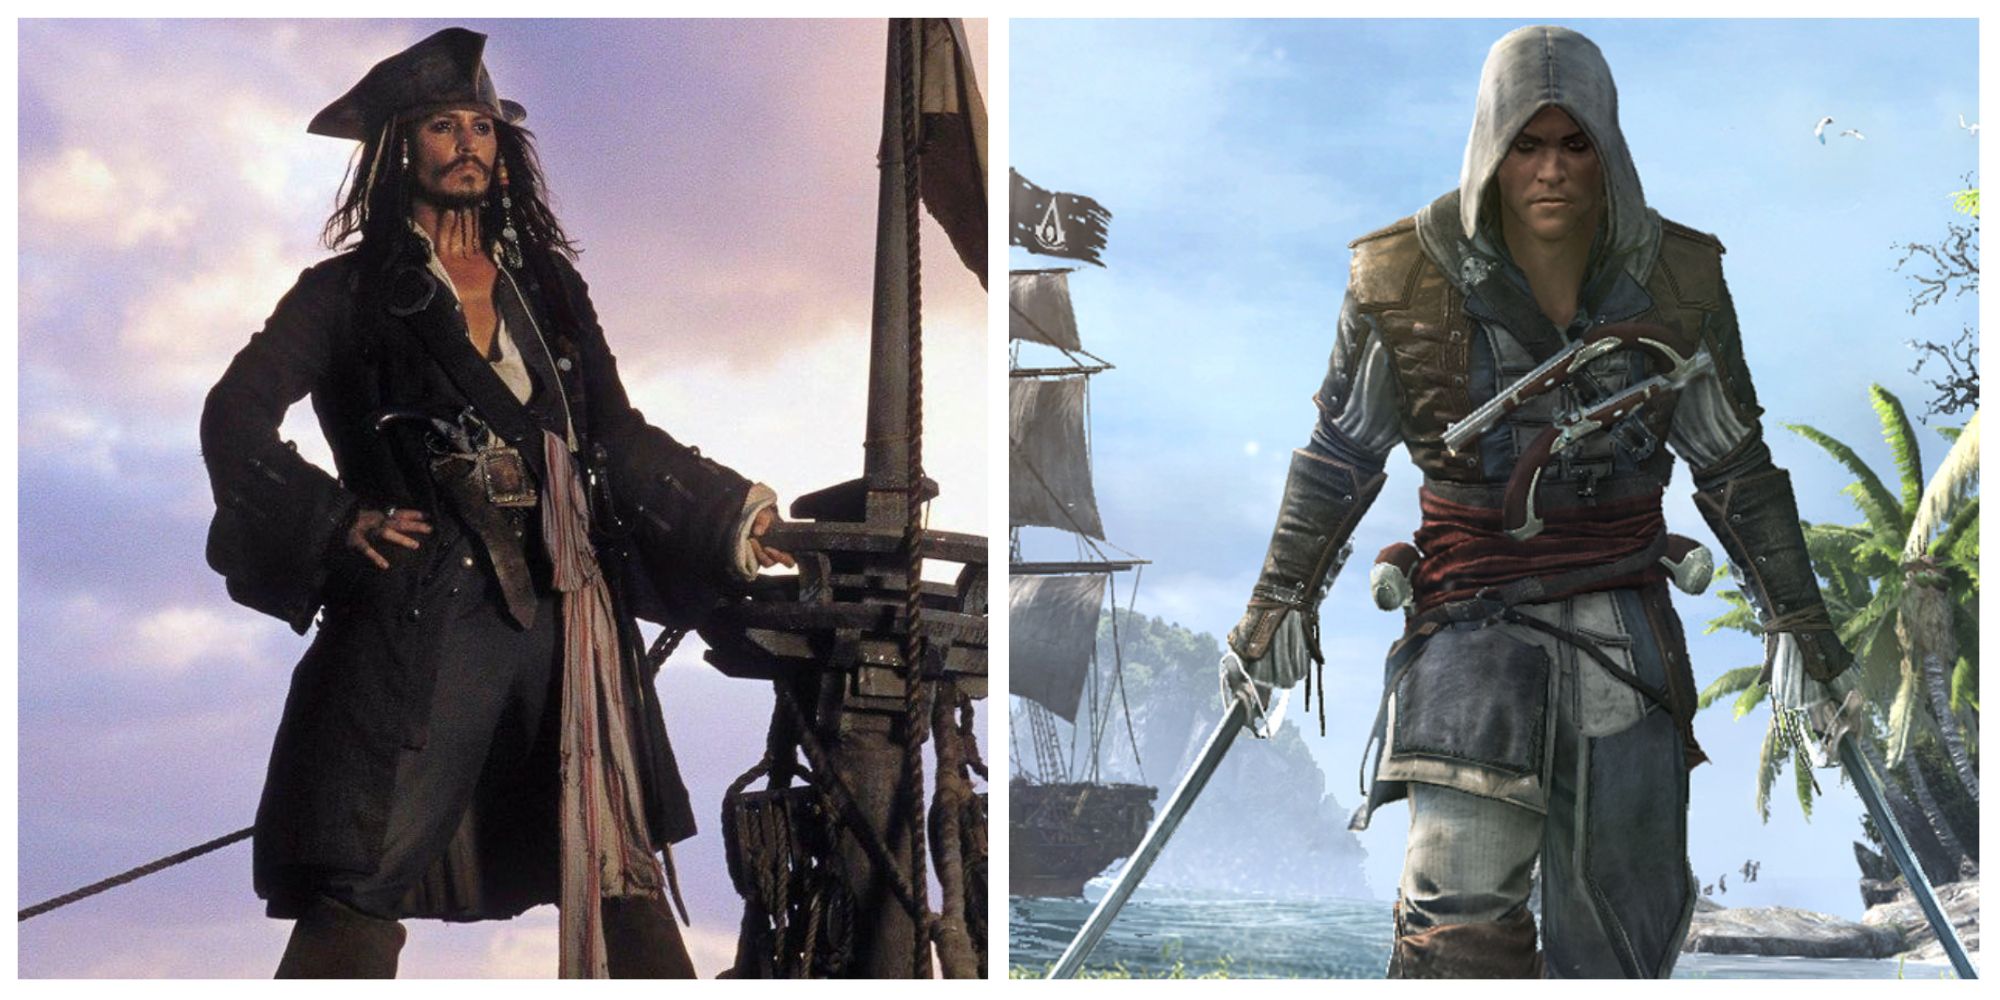 Pirates of the Caribbean Assassin's Creed Black Flag